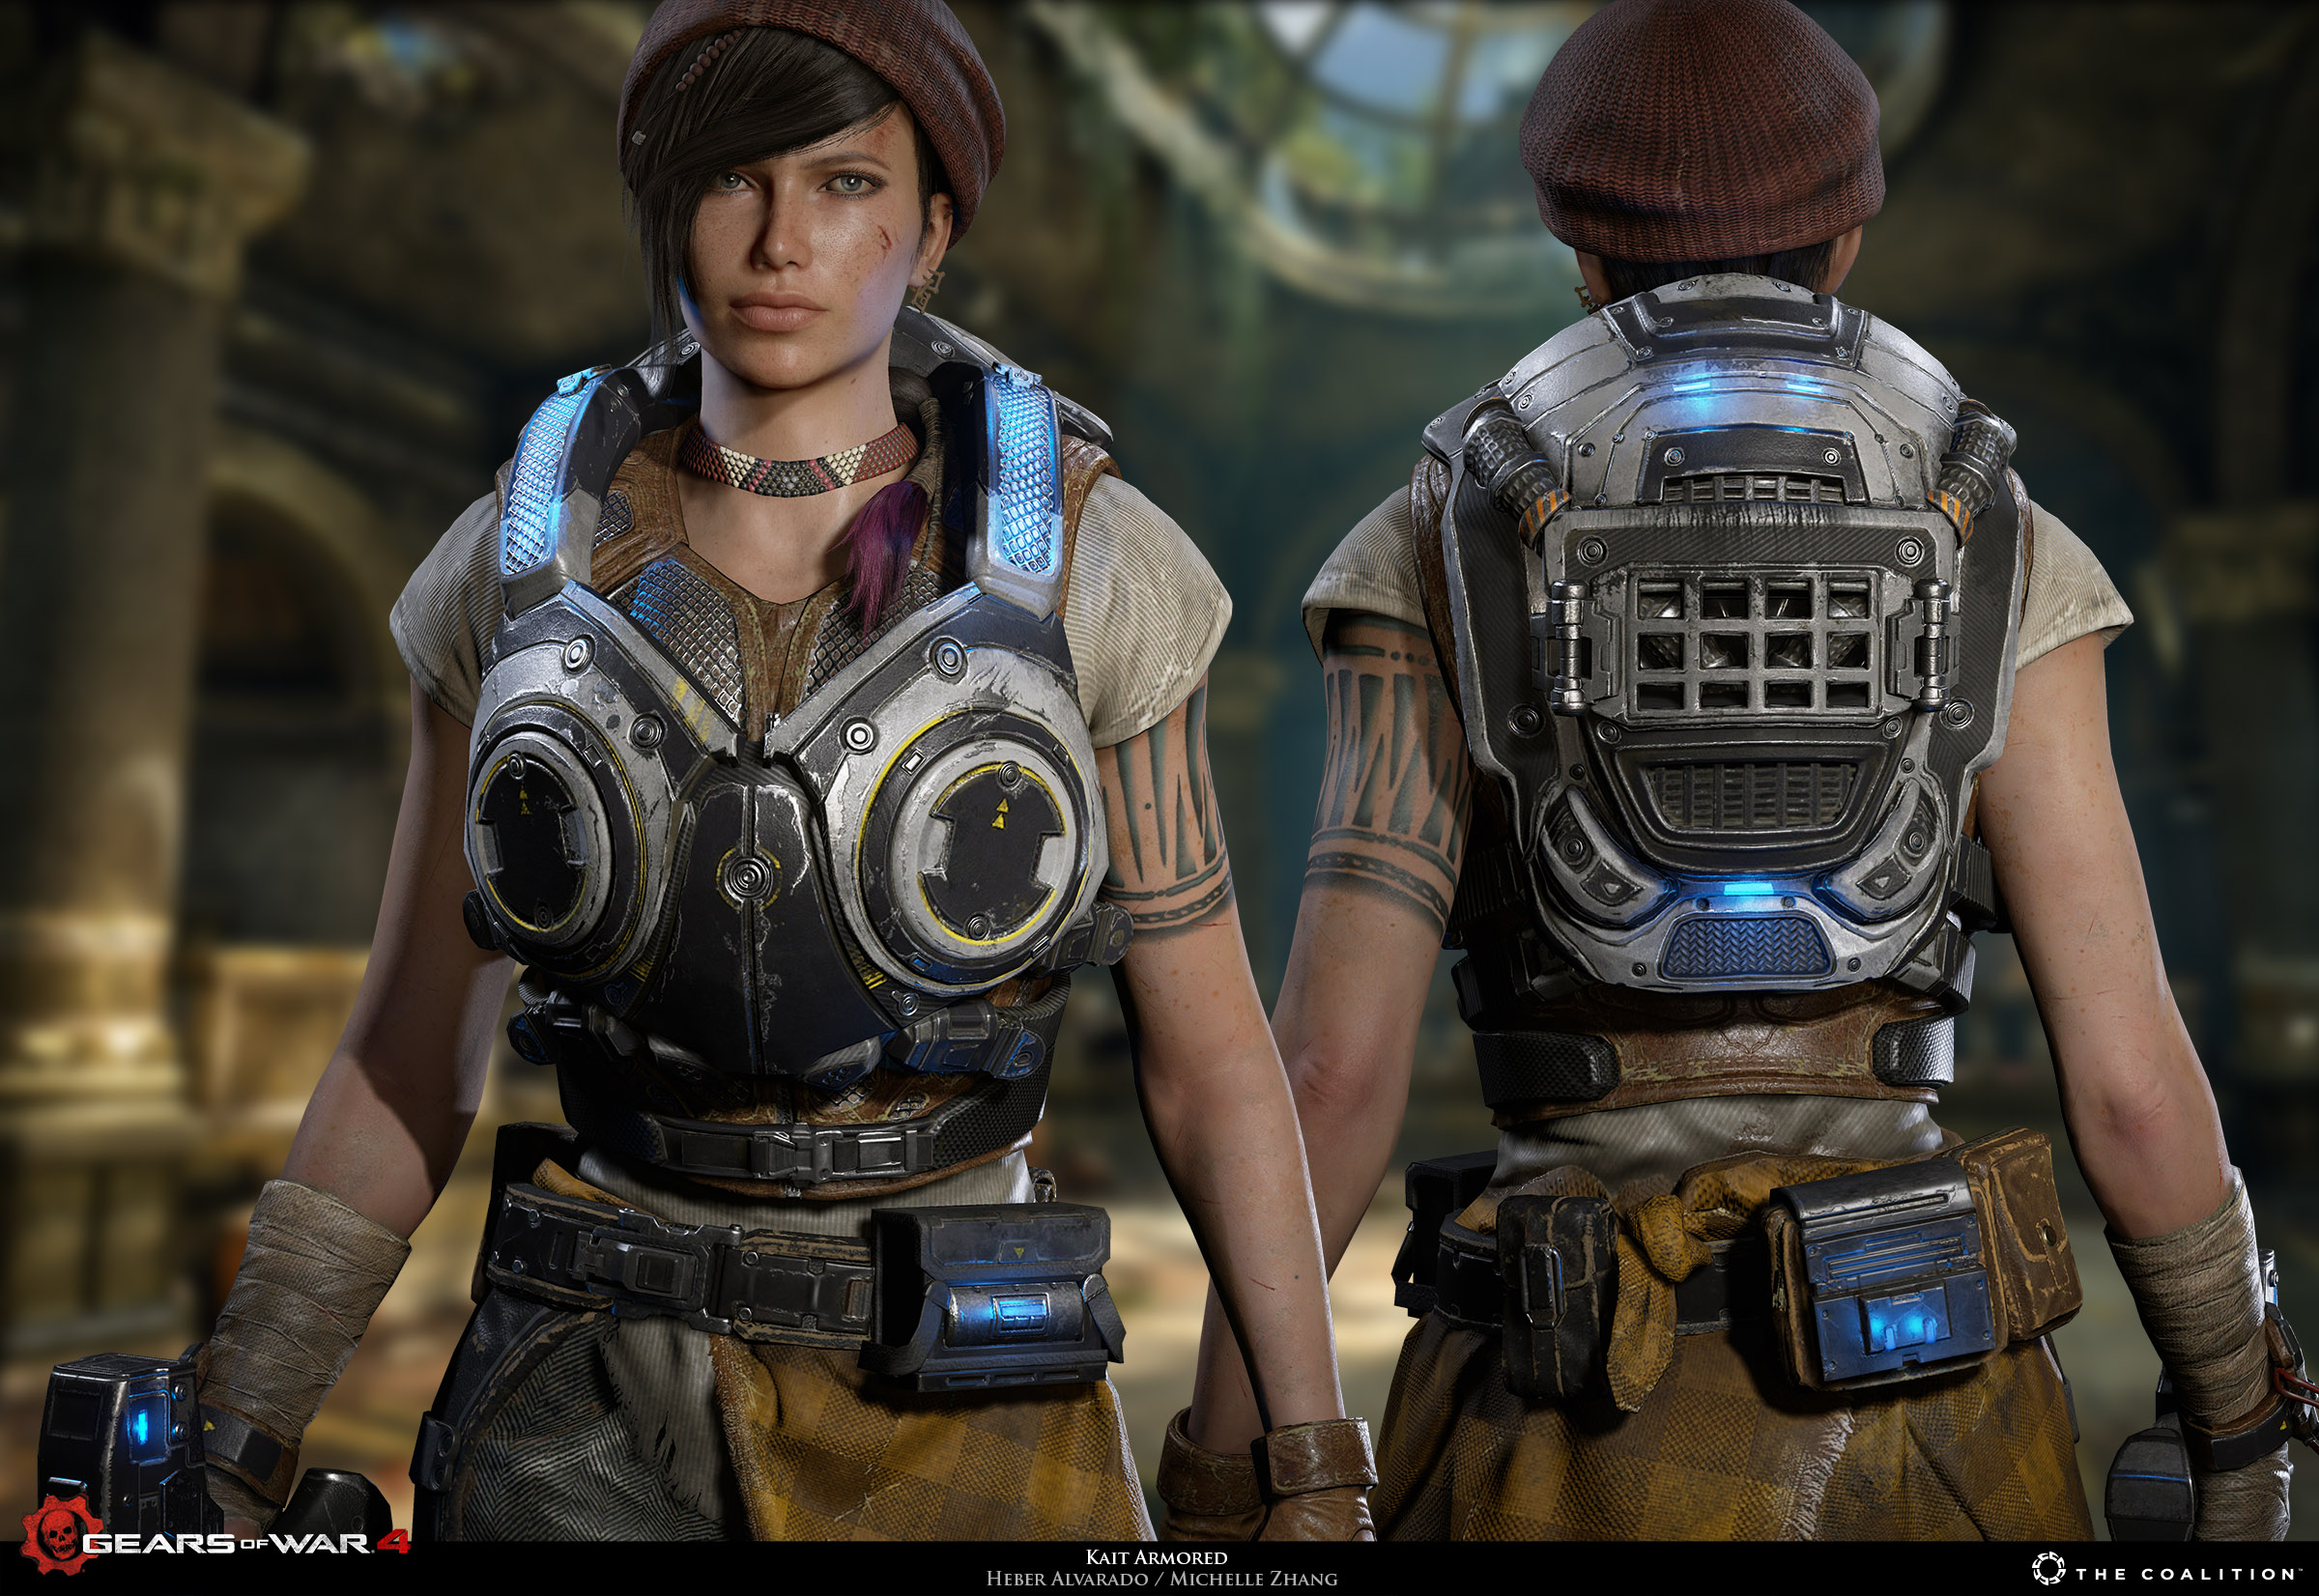 Gears of war 4. About the characters - X35 Earthwalker